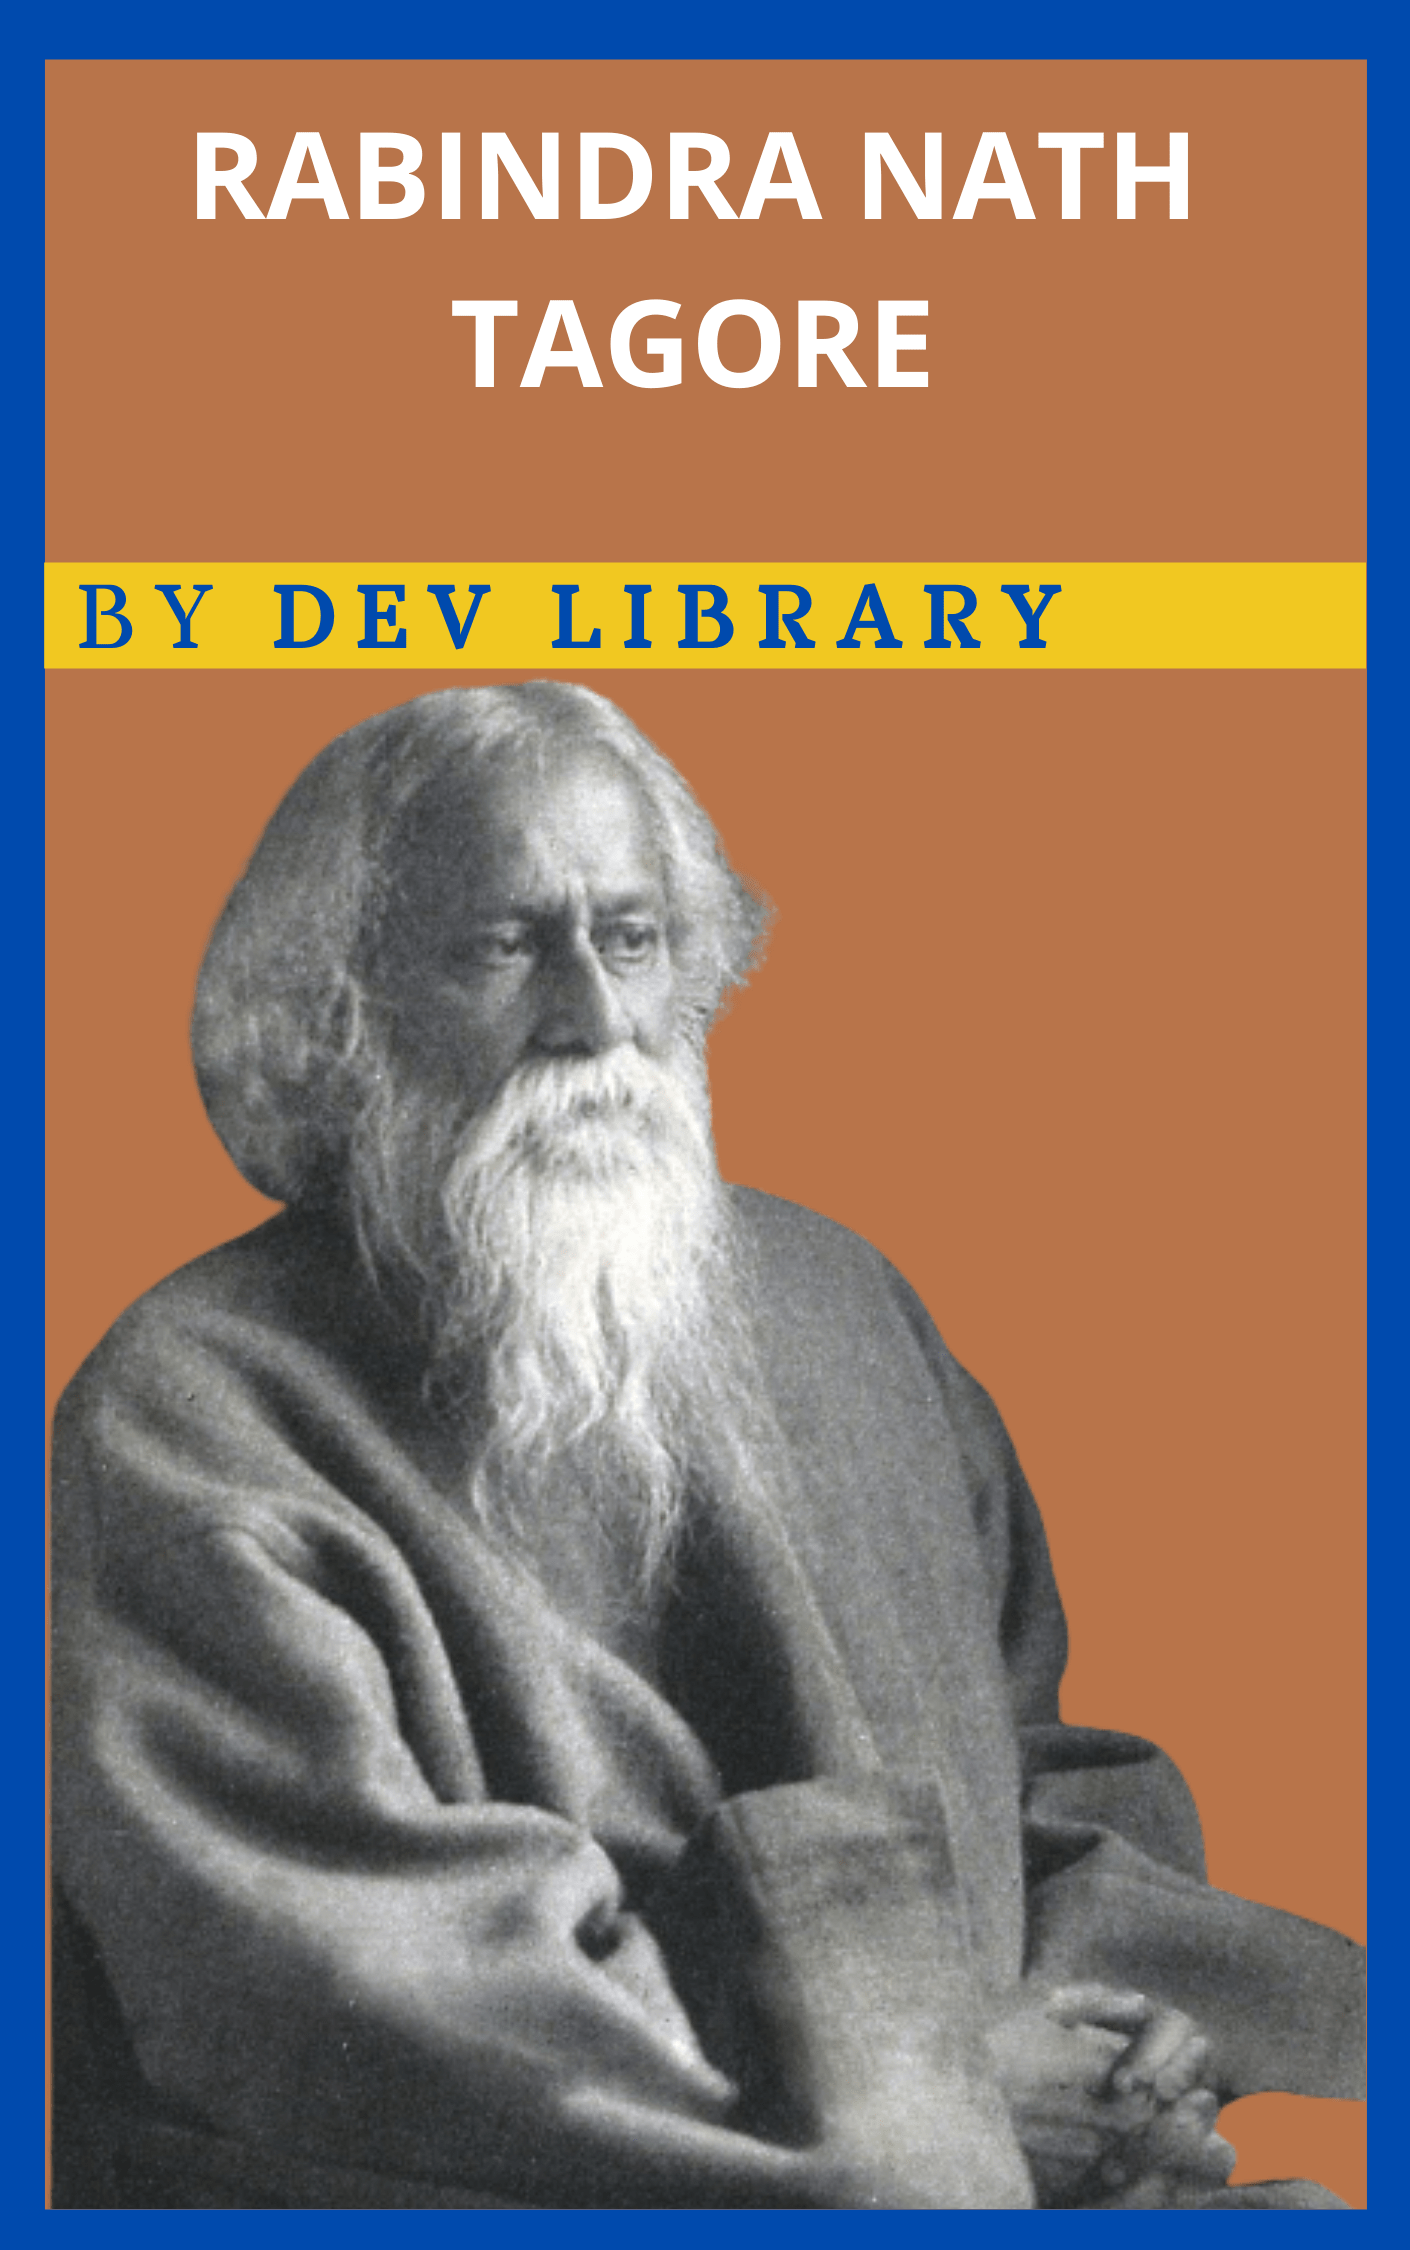 biography of rabindranath tagore for class 8